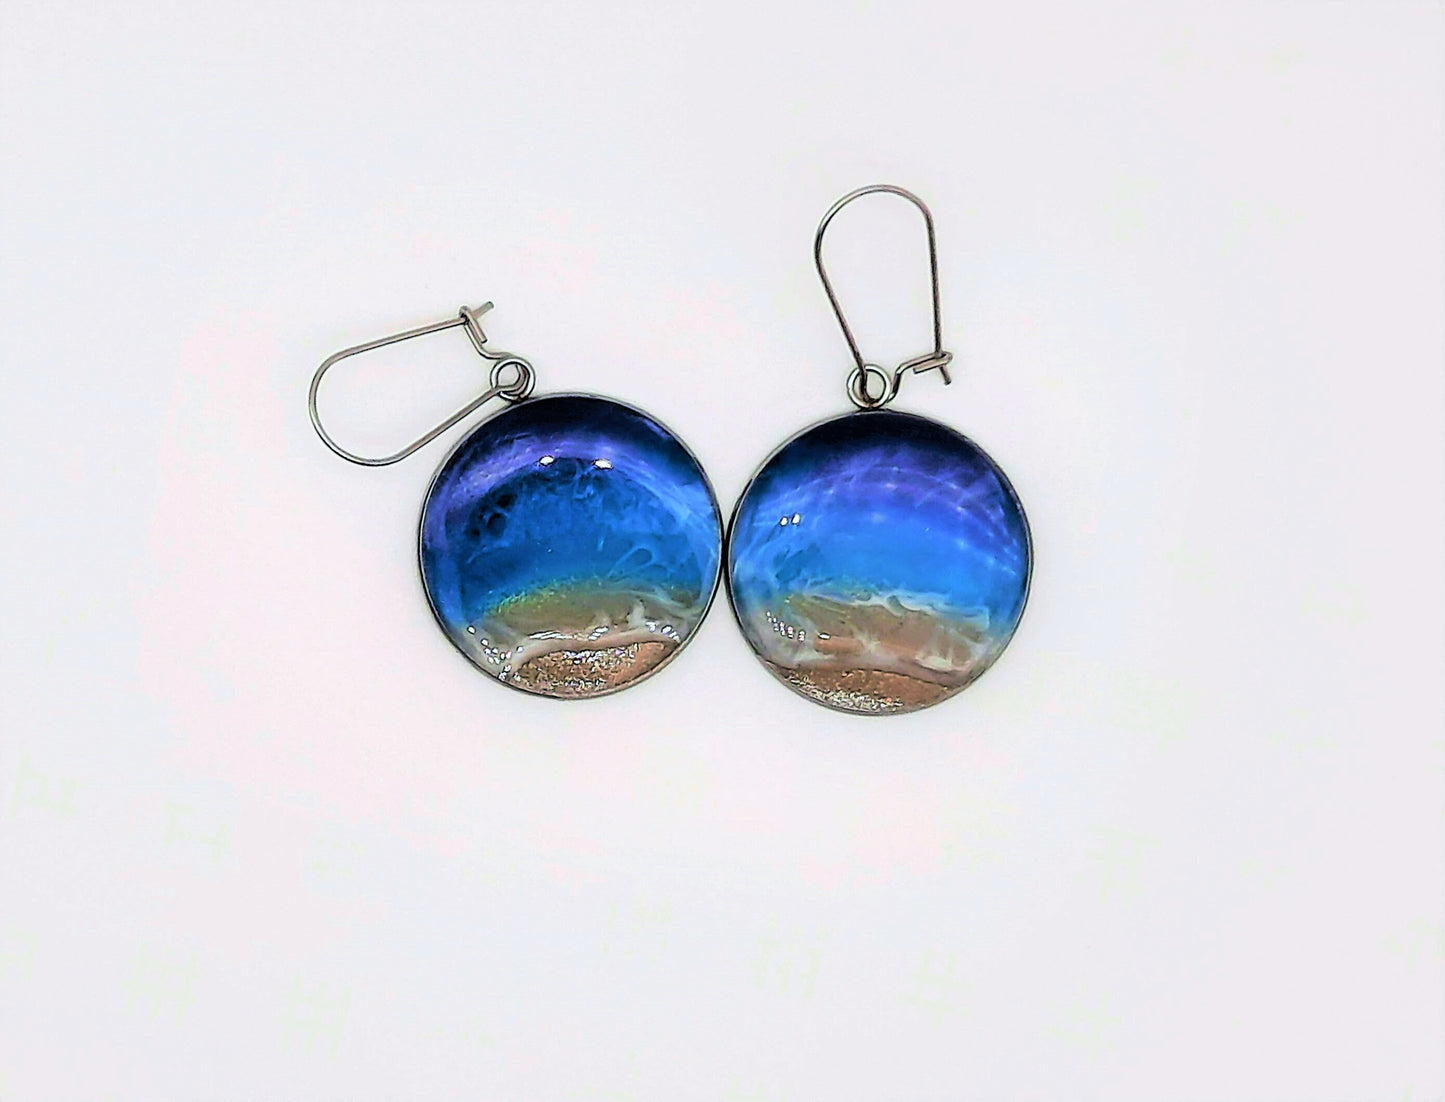 Real Sand Resin Waves Earrings/Ocean Beach Scene/Seascape Earrings/Made w/ Real Sand, Resin, Mica, and Hypoallergenic Stainless Steel